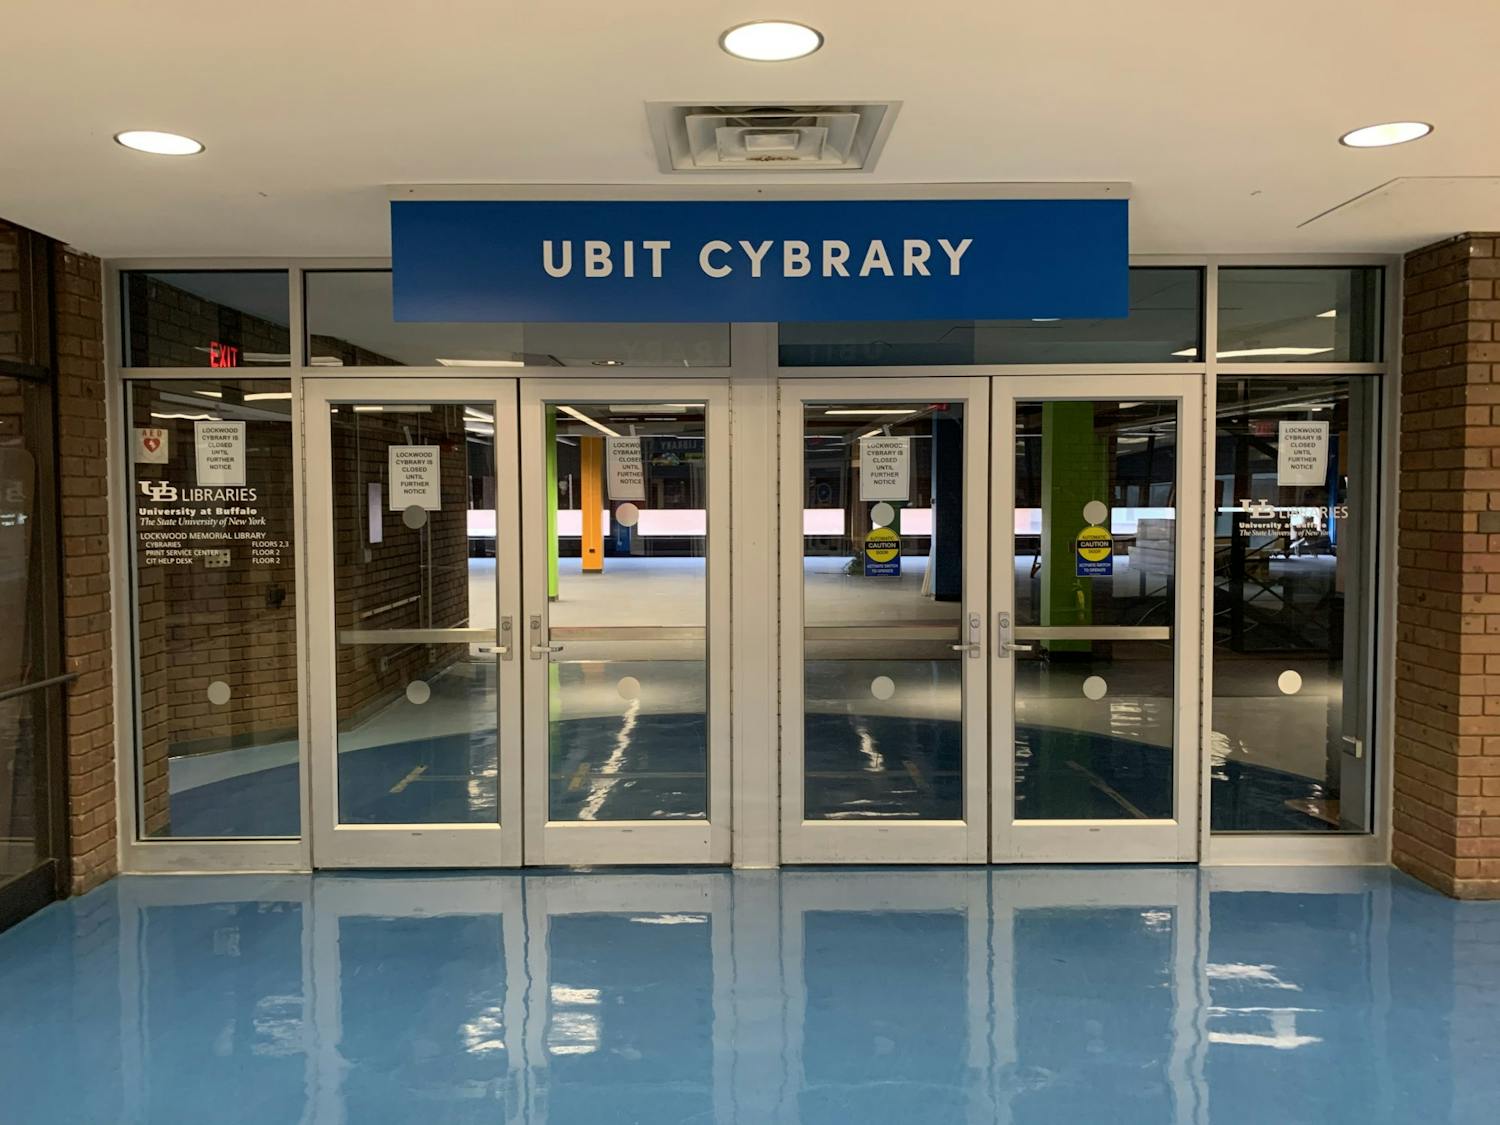 UBIT has received 328 complaints of Wi-Fi connectivity issues on North Campus since Thursday, 300 of which were filed on Monday and Tuesday alone. 